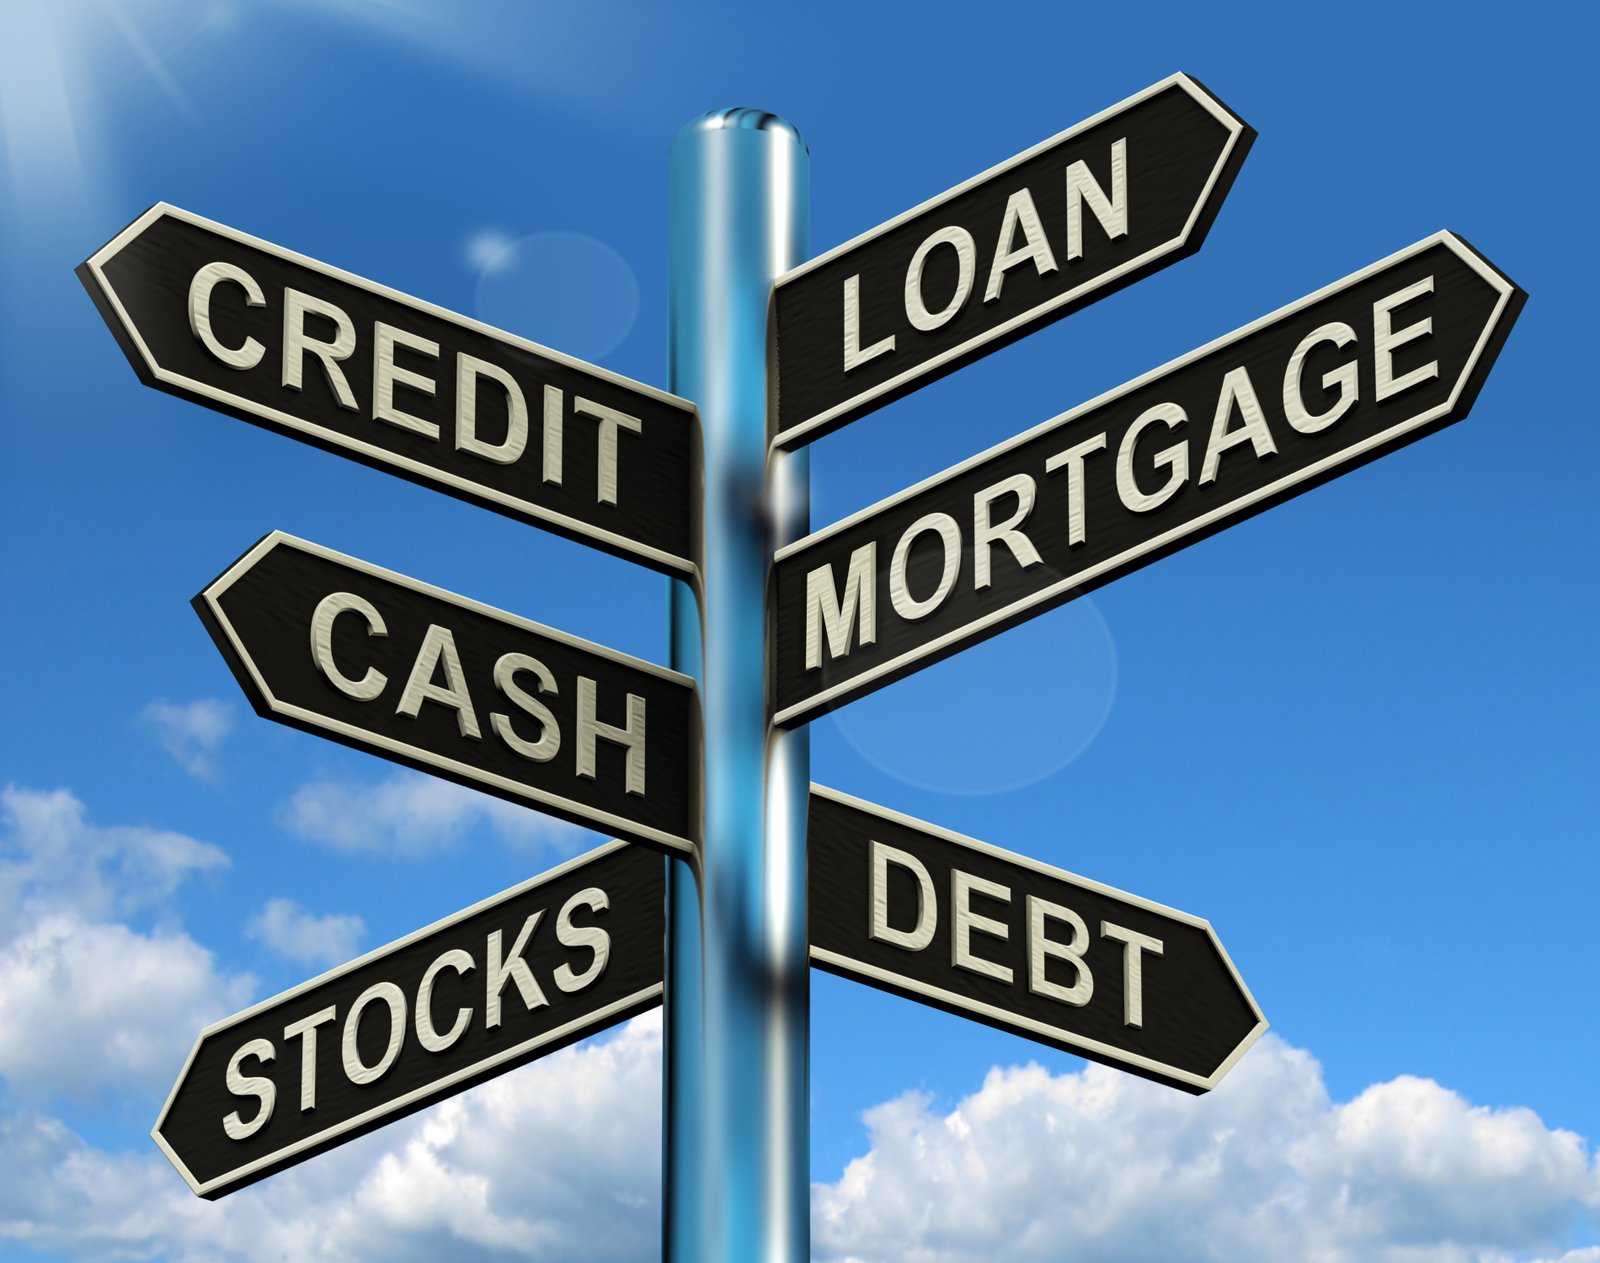 A photo of a pole with signs hanging on it pointing in different directions. The sign names are loan. credit. mortgage, cash, debt, and stocks.